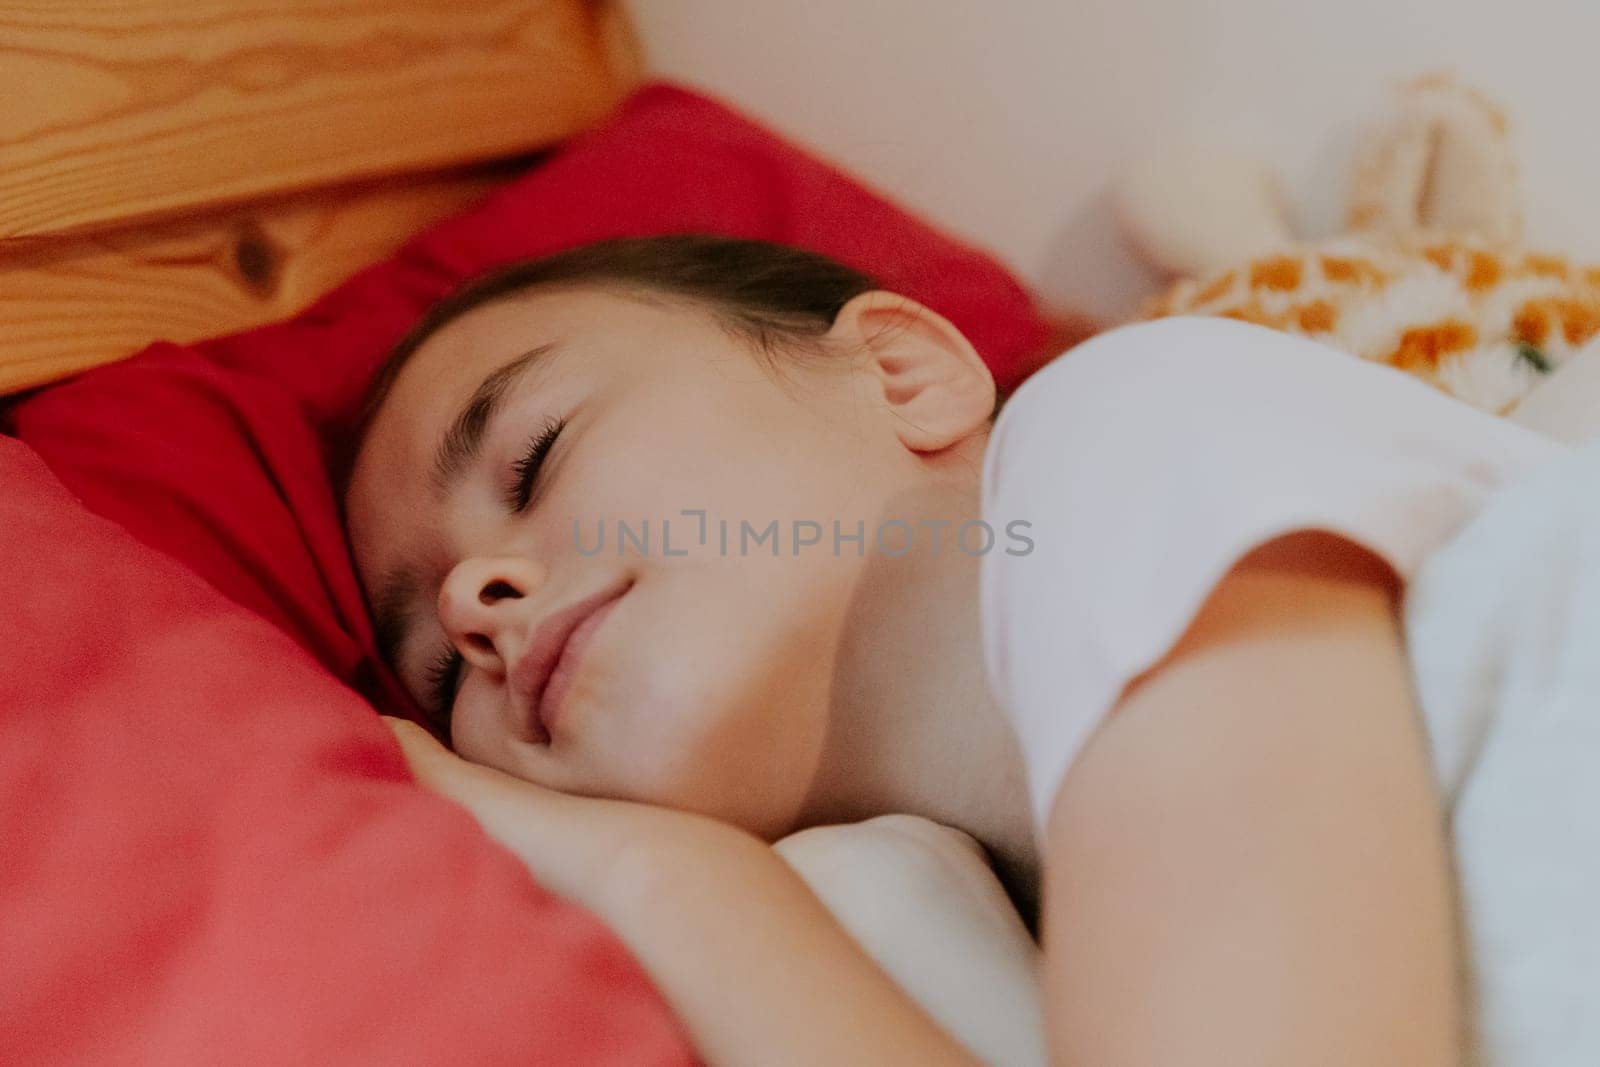 One beautiful little Caucasian girl sleeps sweetly in a wooden bed on a red pillow with a soft toy giraffe behind her back, close-up side view.